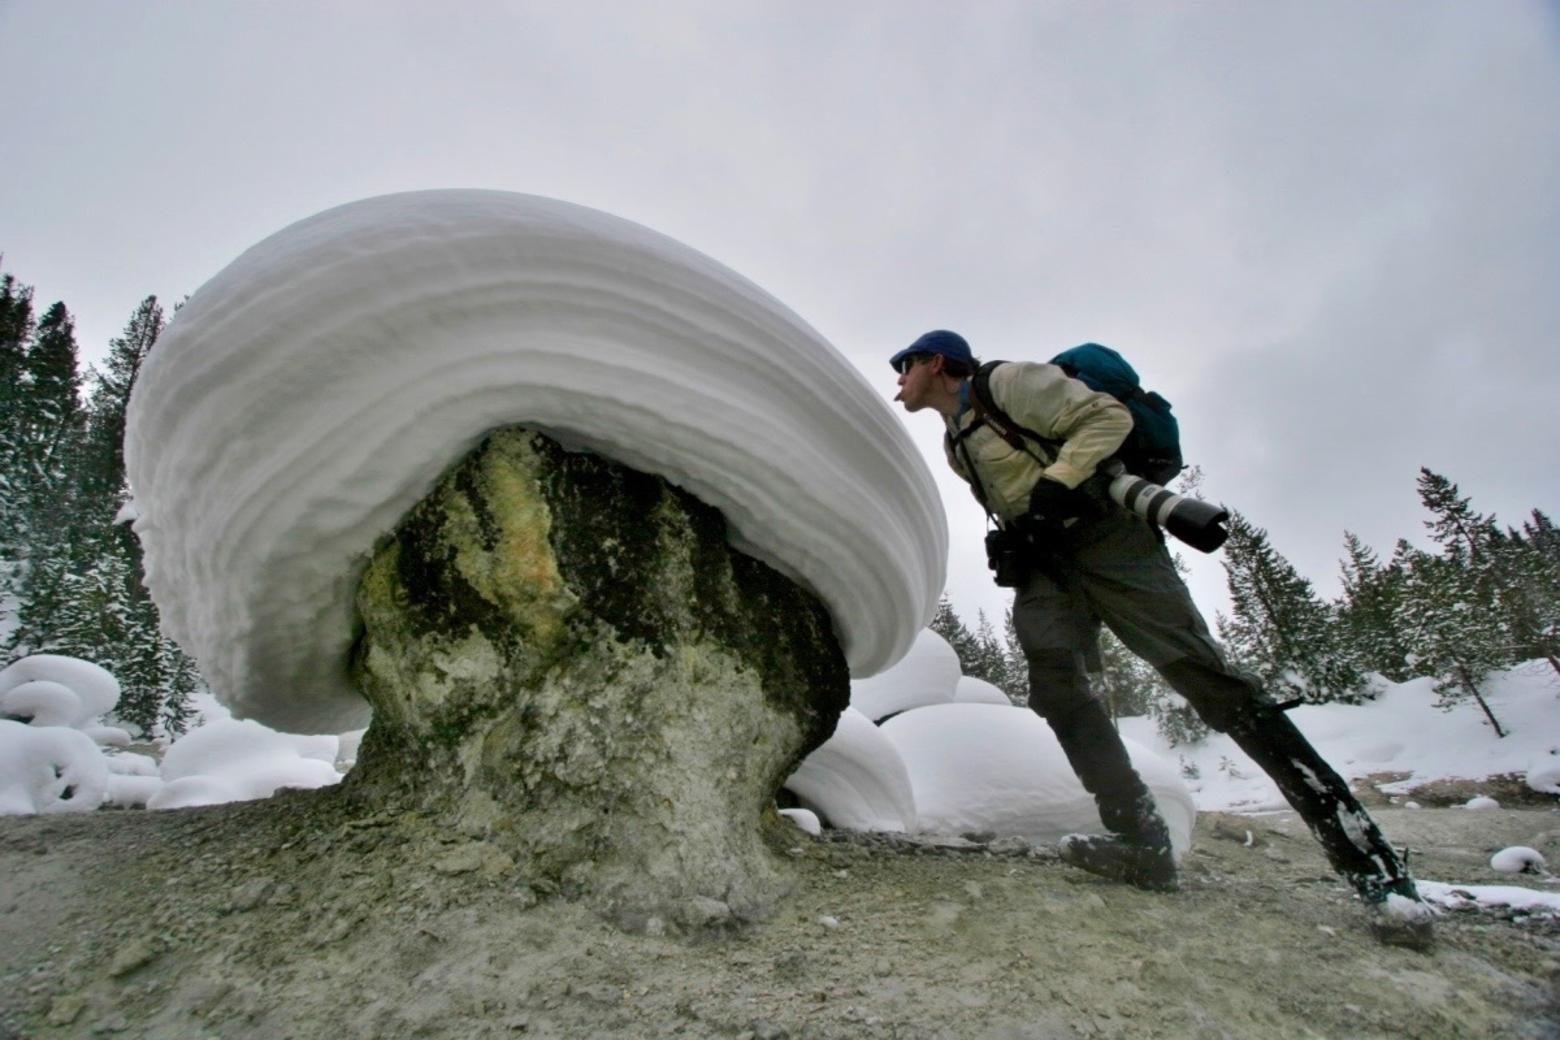 "Tasting a snow cream puff," Steven Fuller writes, "and up here on the Yellowstone Plateau the snow tastes good.."